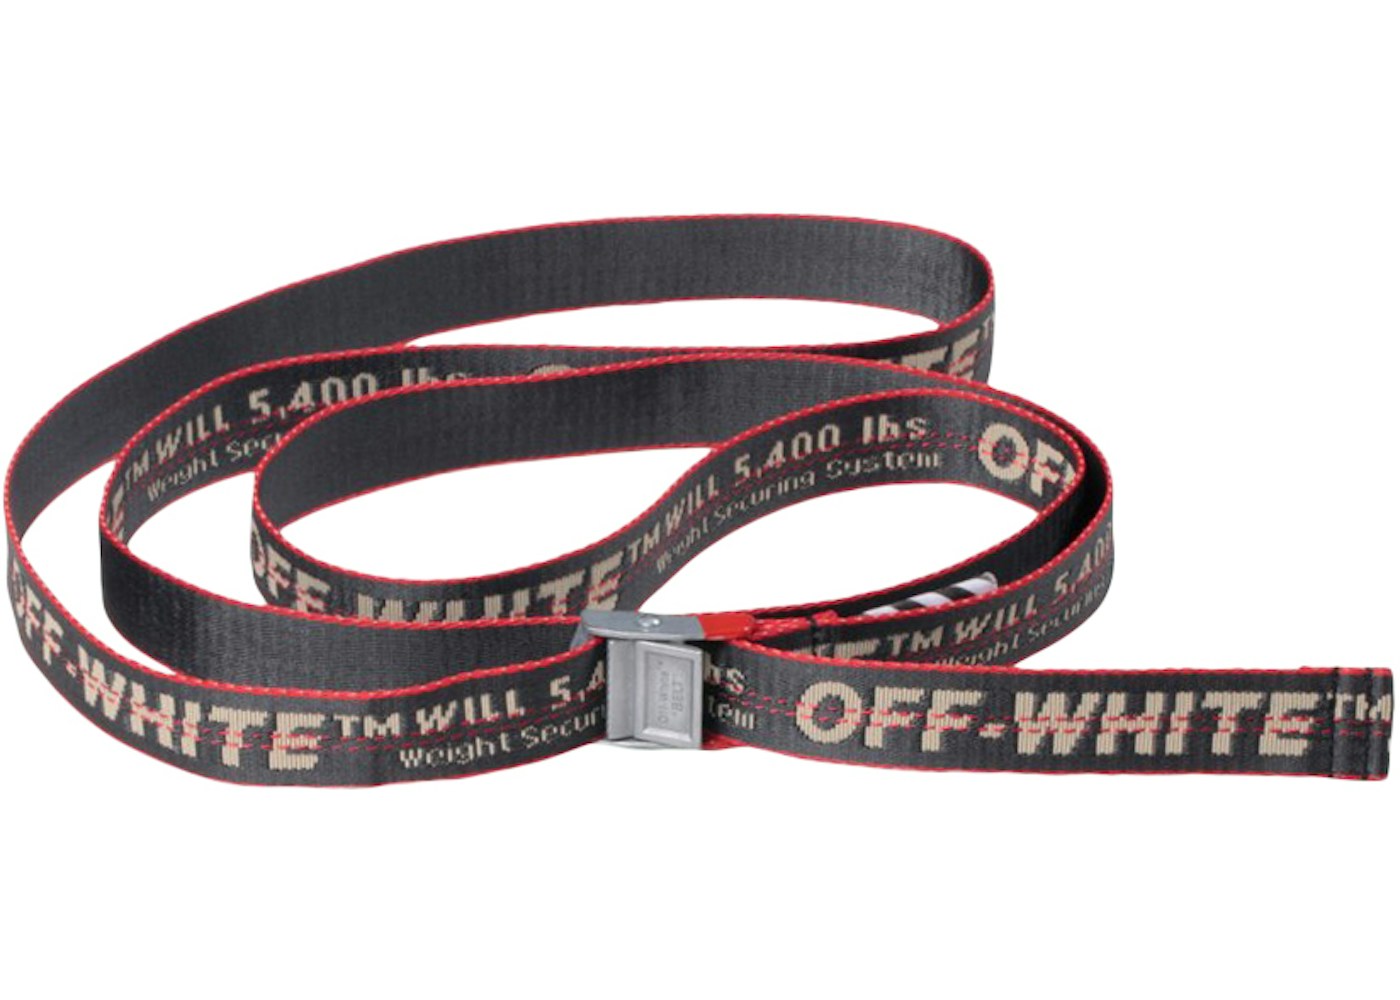 OFF-WHITE Mini Industrial Belt Anthracite/Red - FW19